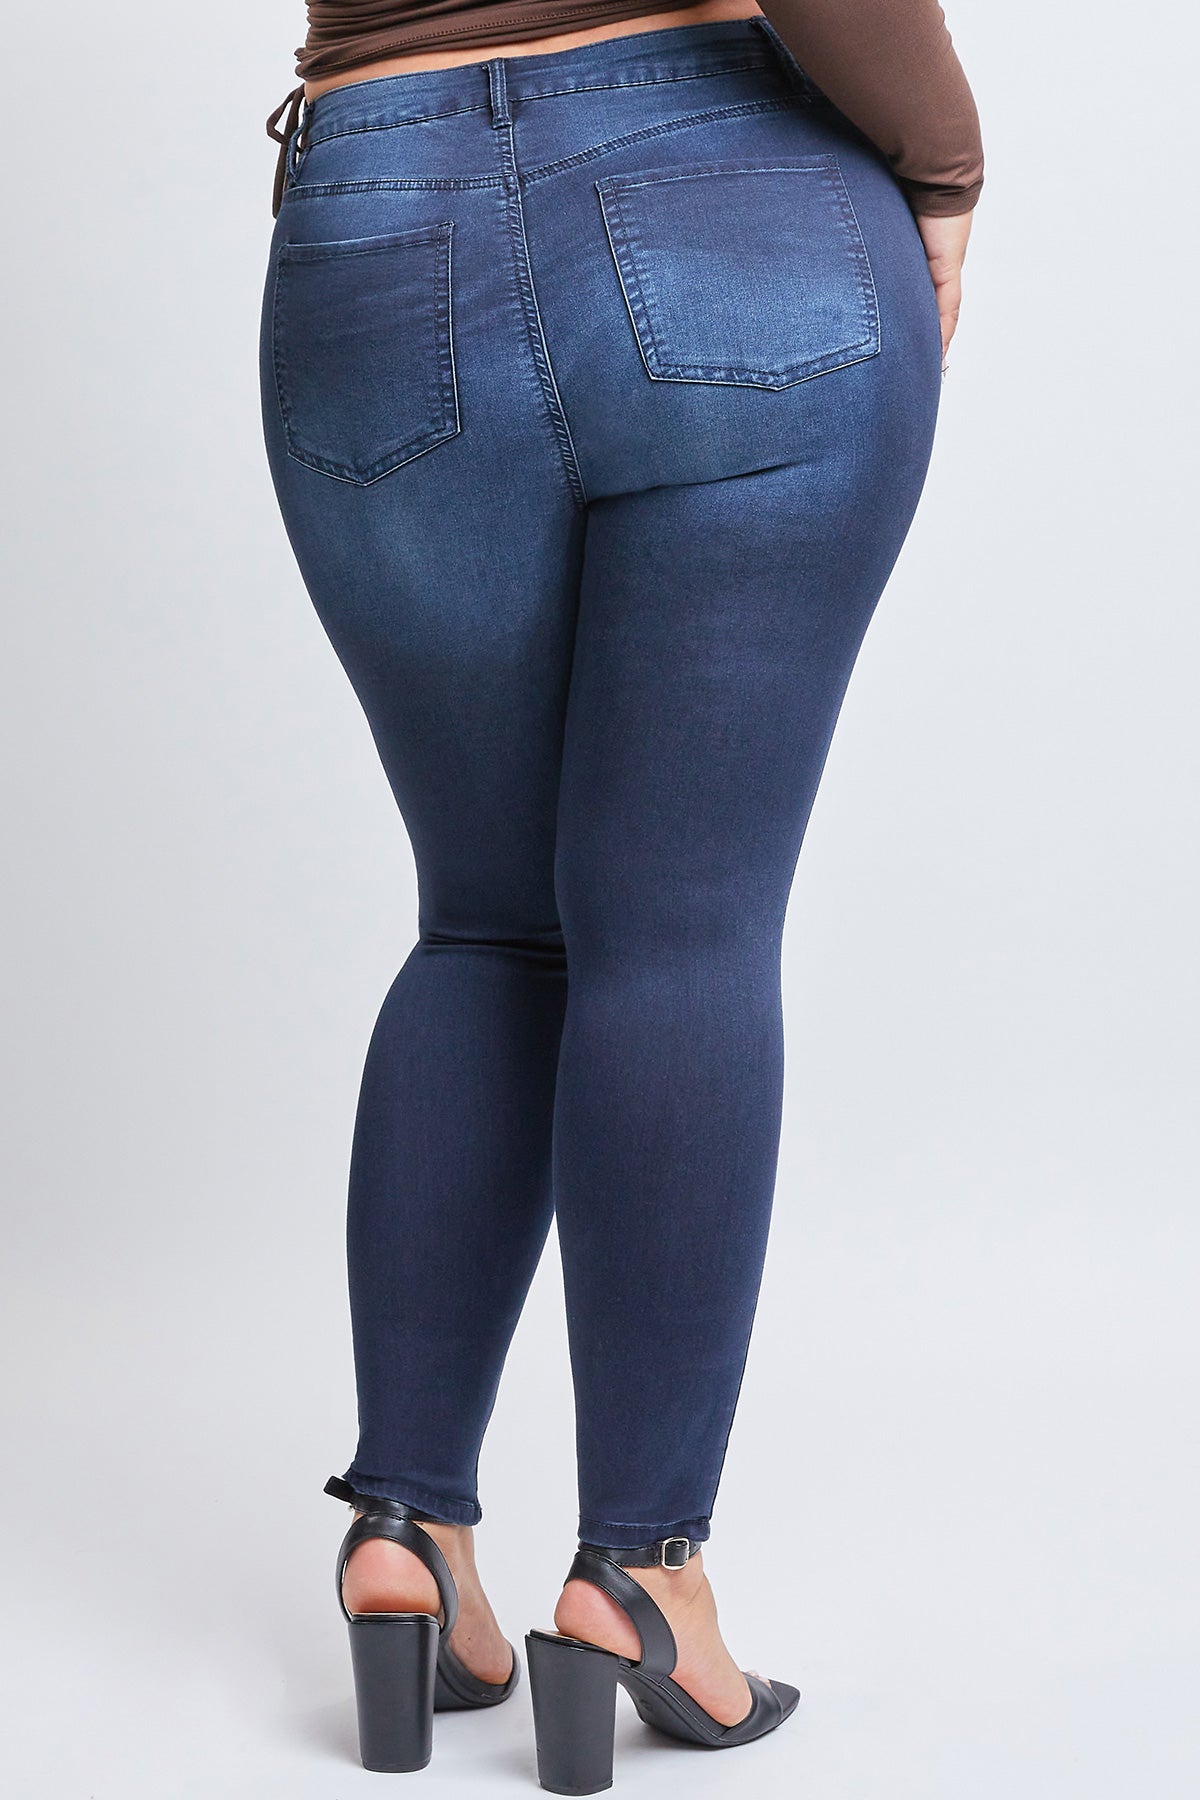 Junior Plus Size Hyper Denim Super Stretchy Flare Jean Pack Of 6 from YMI –  YMI JEANS WHOLESALE